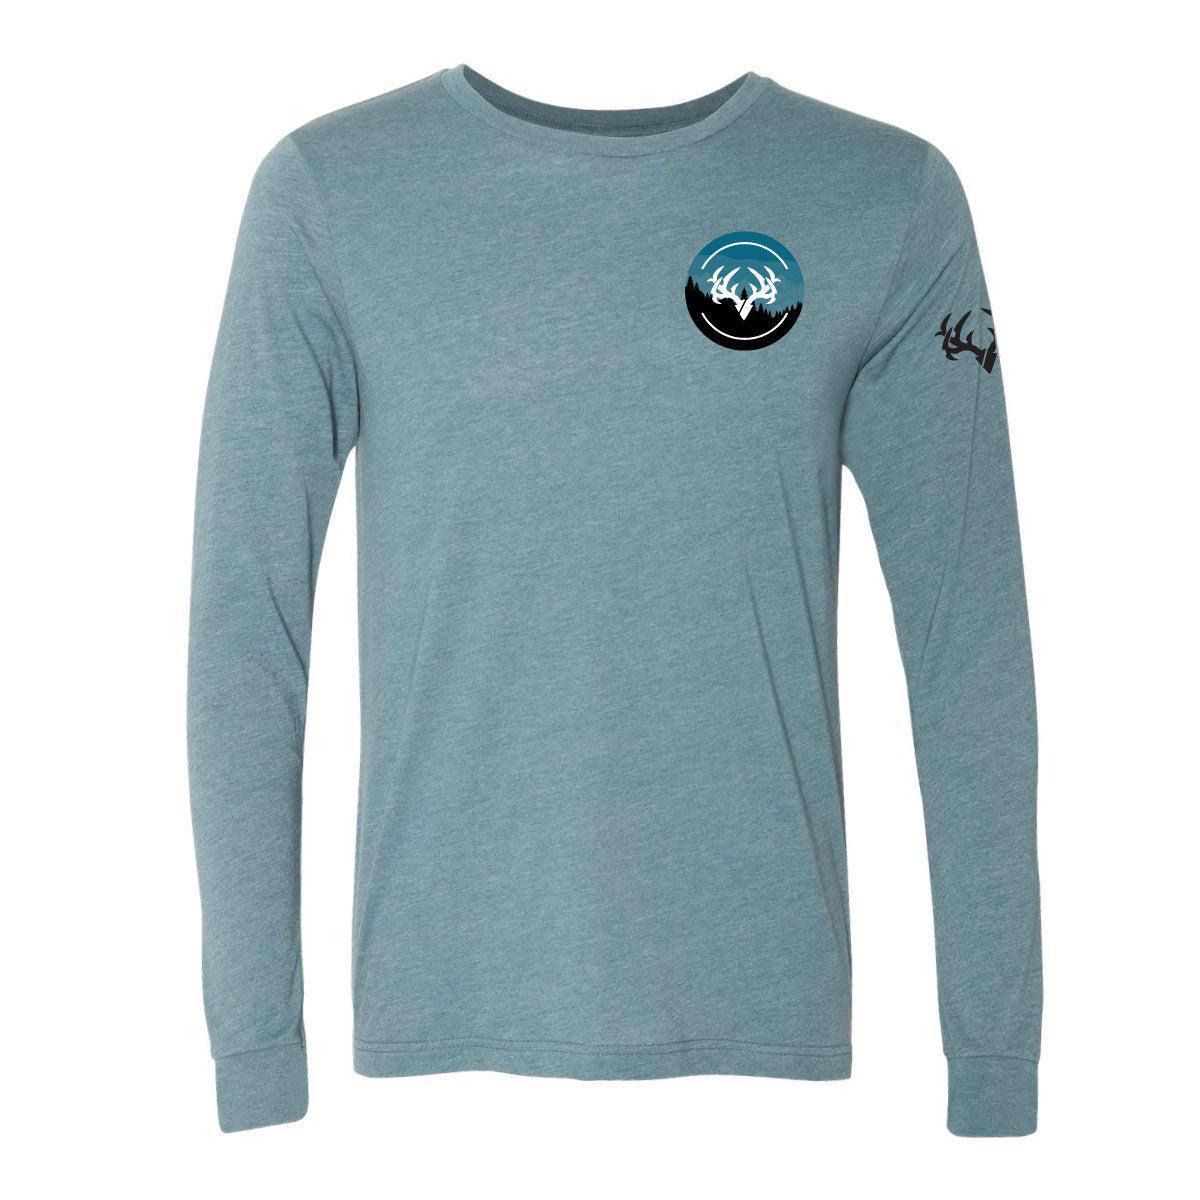 The Ascent Long Sleeve Tee